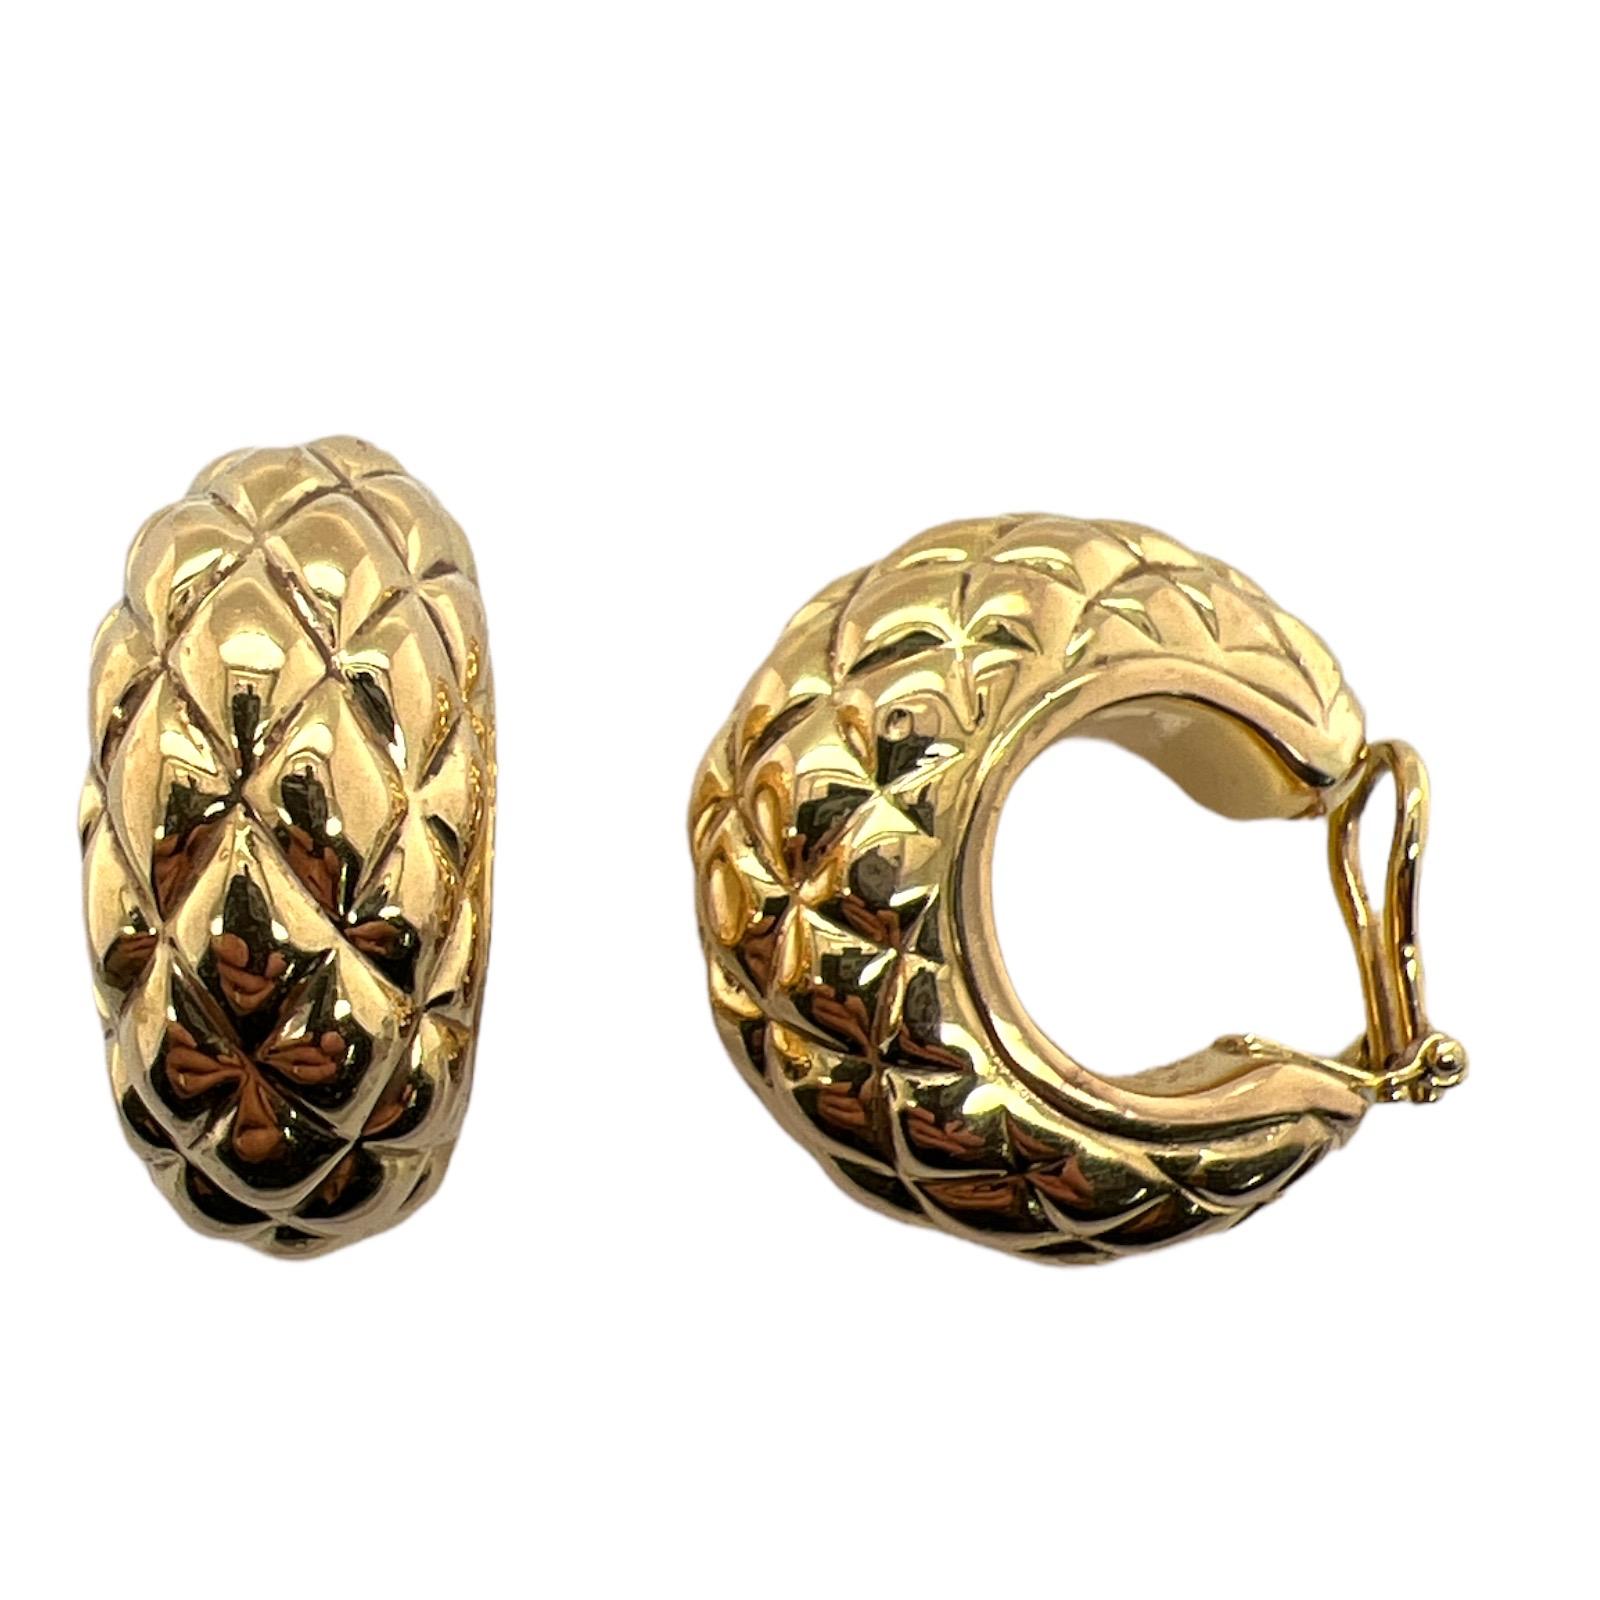 Great everyday lightweight quilted hoop earrings crafted in 18 karat yellow gold. The earrings feature a puffed quilted pattern and measure 25mm in length. Ear clip backs. 